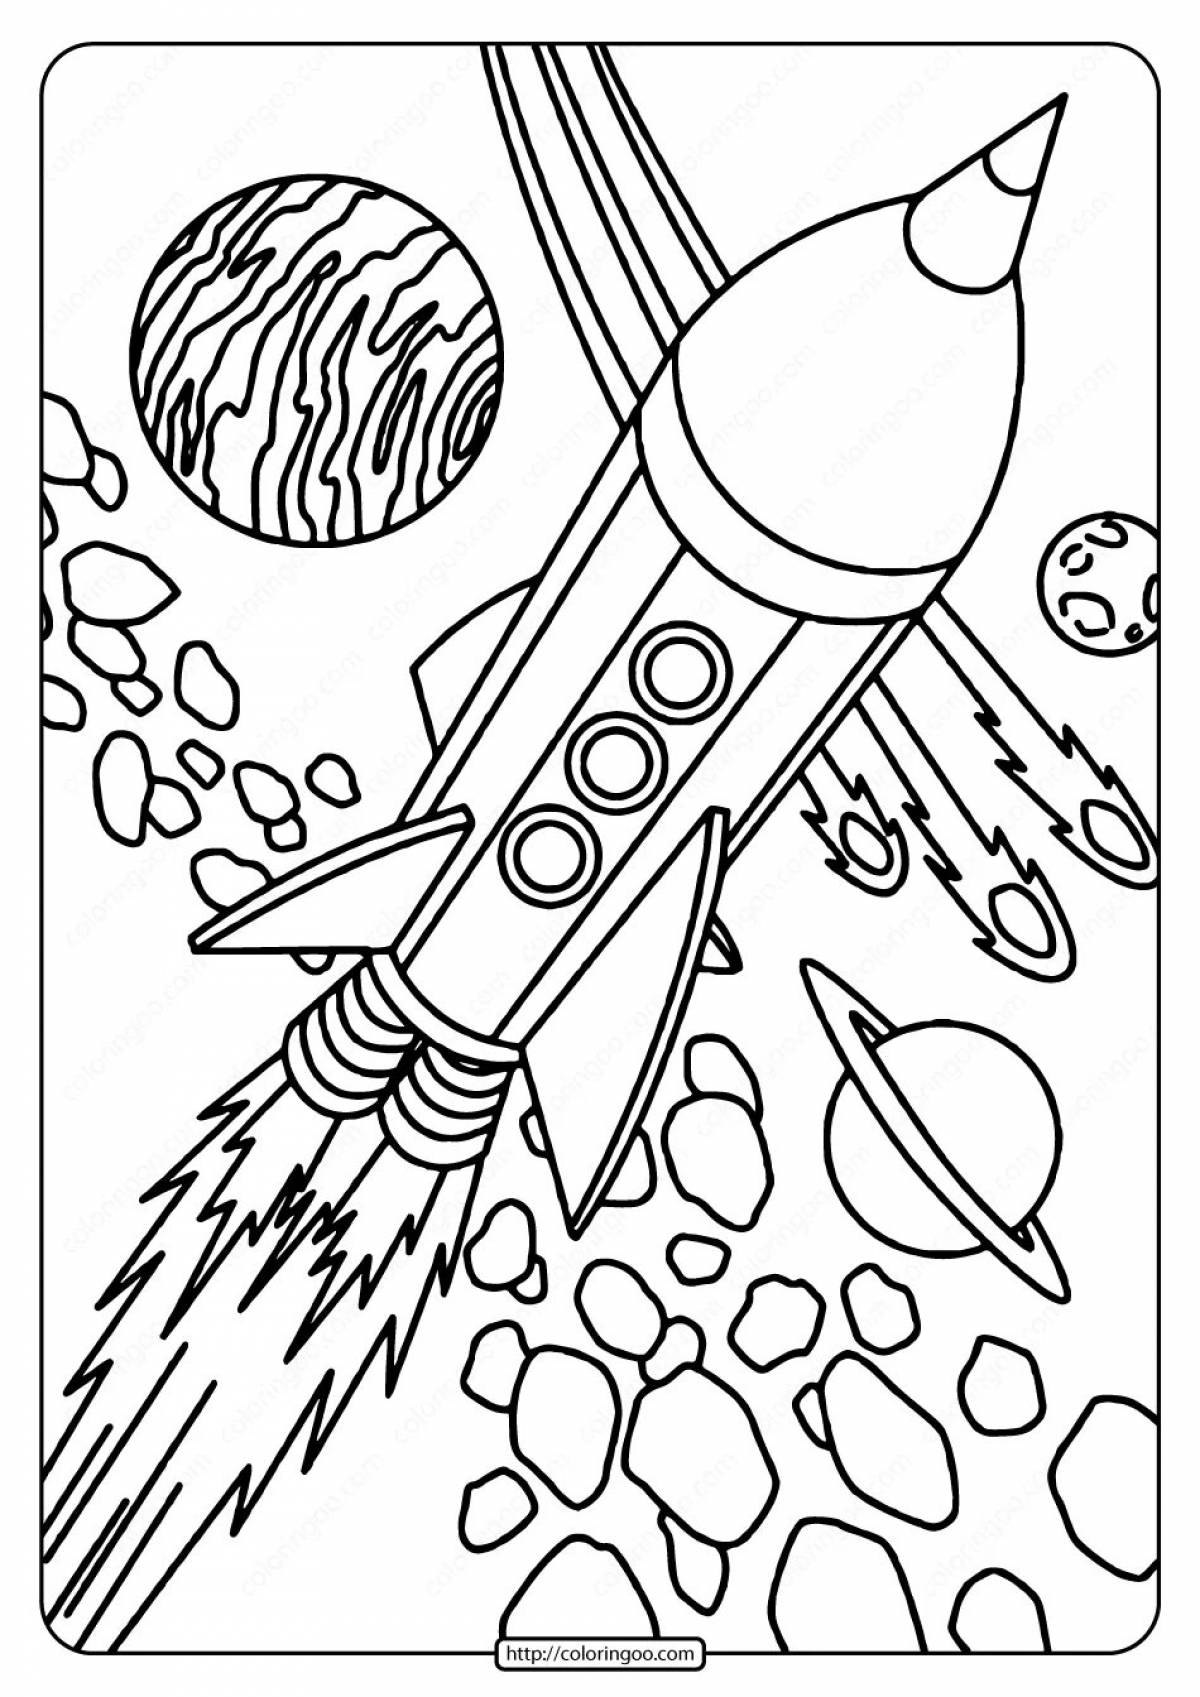 The Incredible Astronaut Coloring Page for 4-5 year olds